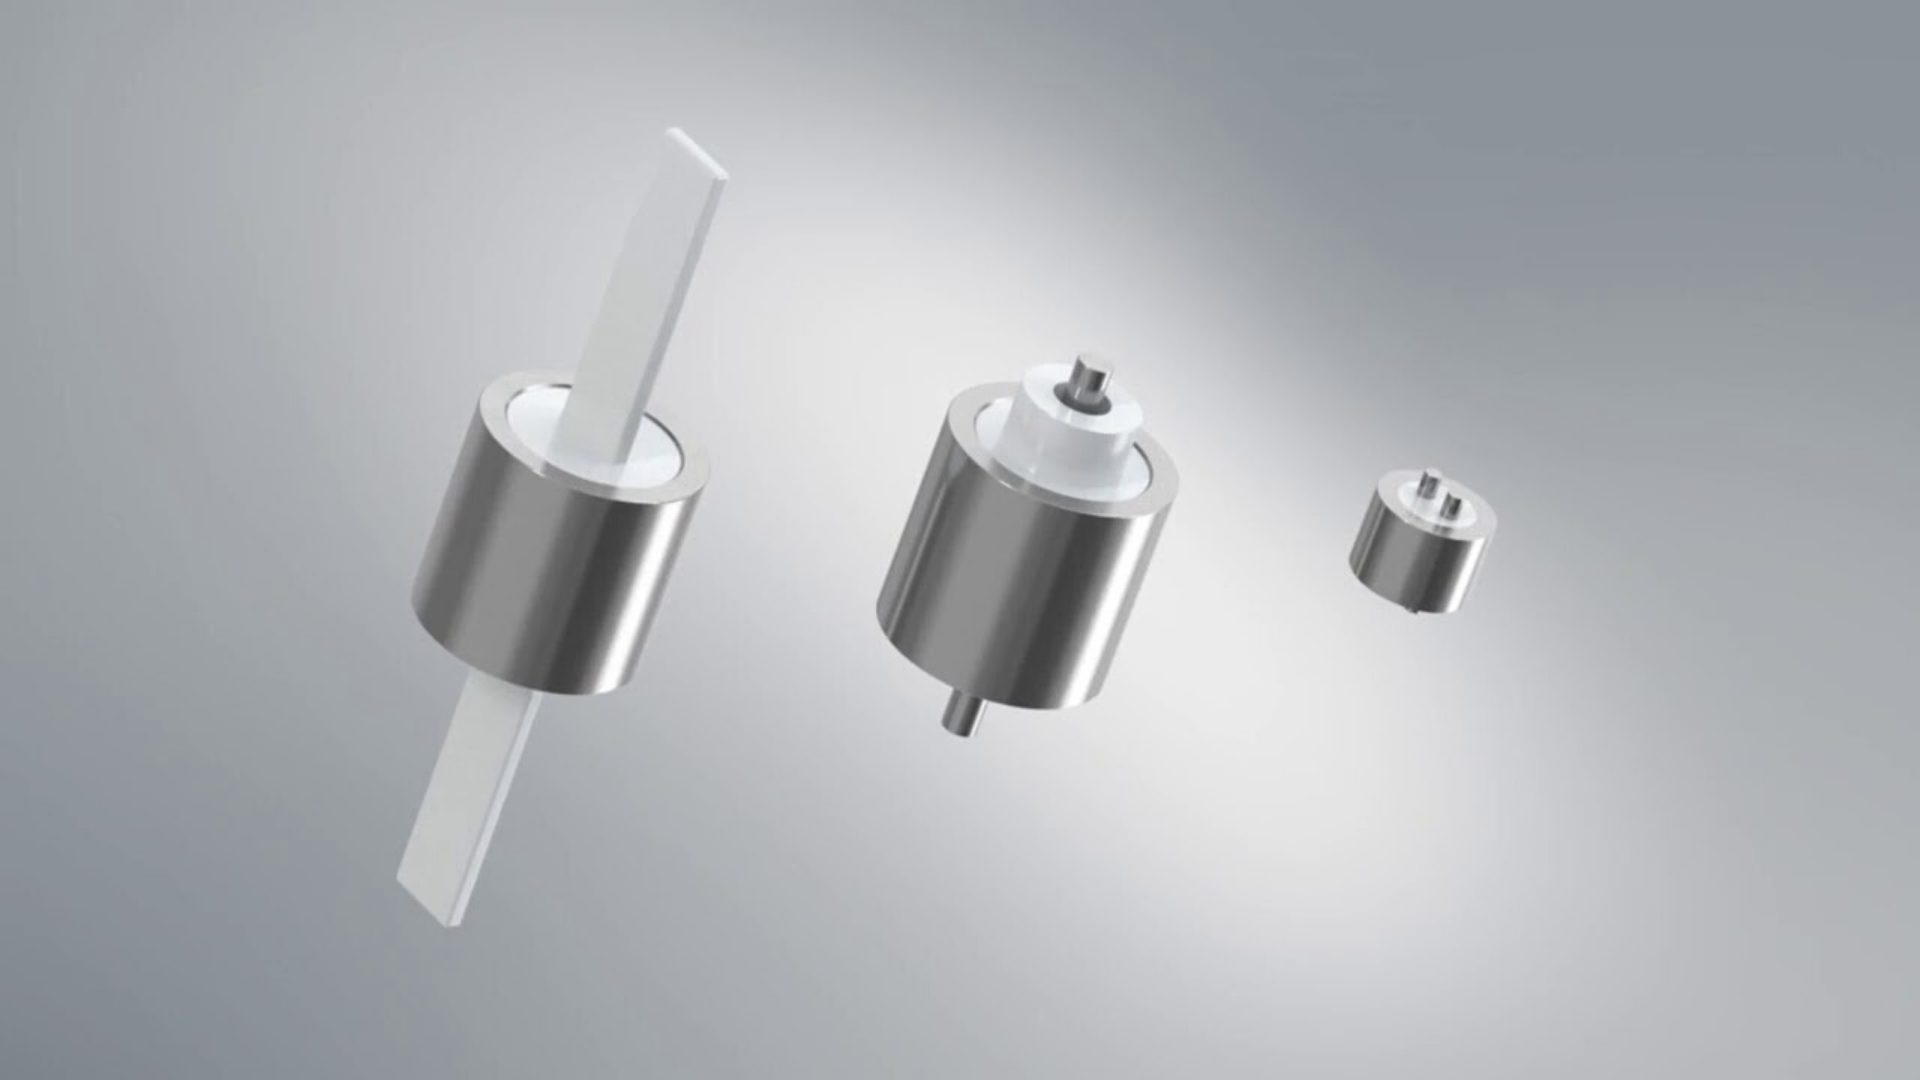 Click to find out how SCHOTT HEATAN™ high-temperature sensor feedthroughs can be customized for specific requirements